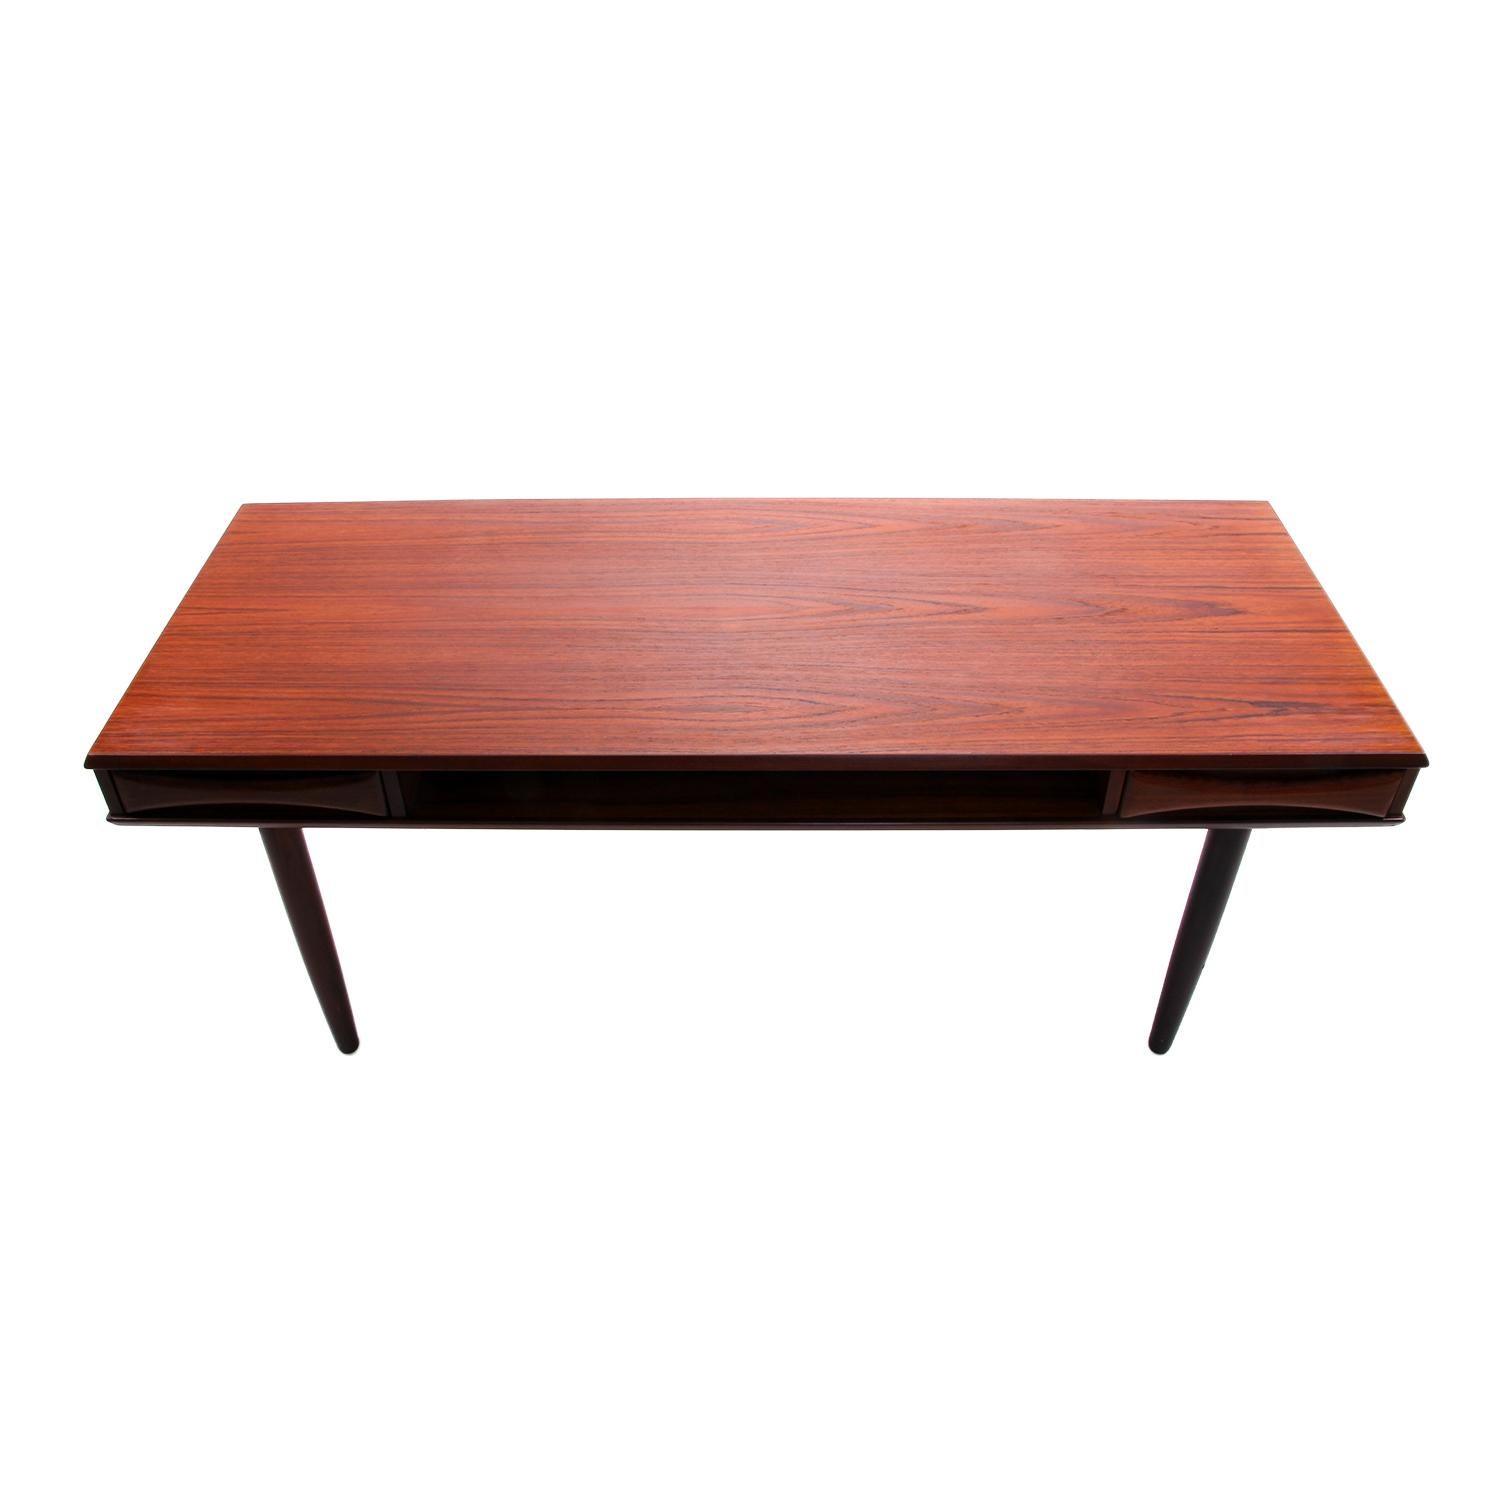 Mid-Century Modern Teak Coffee Table by Danish Furniture Maker, 1960s, with Shelf and Two Drawers